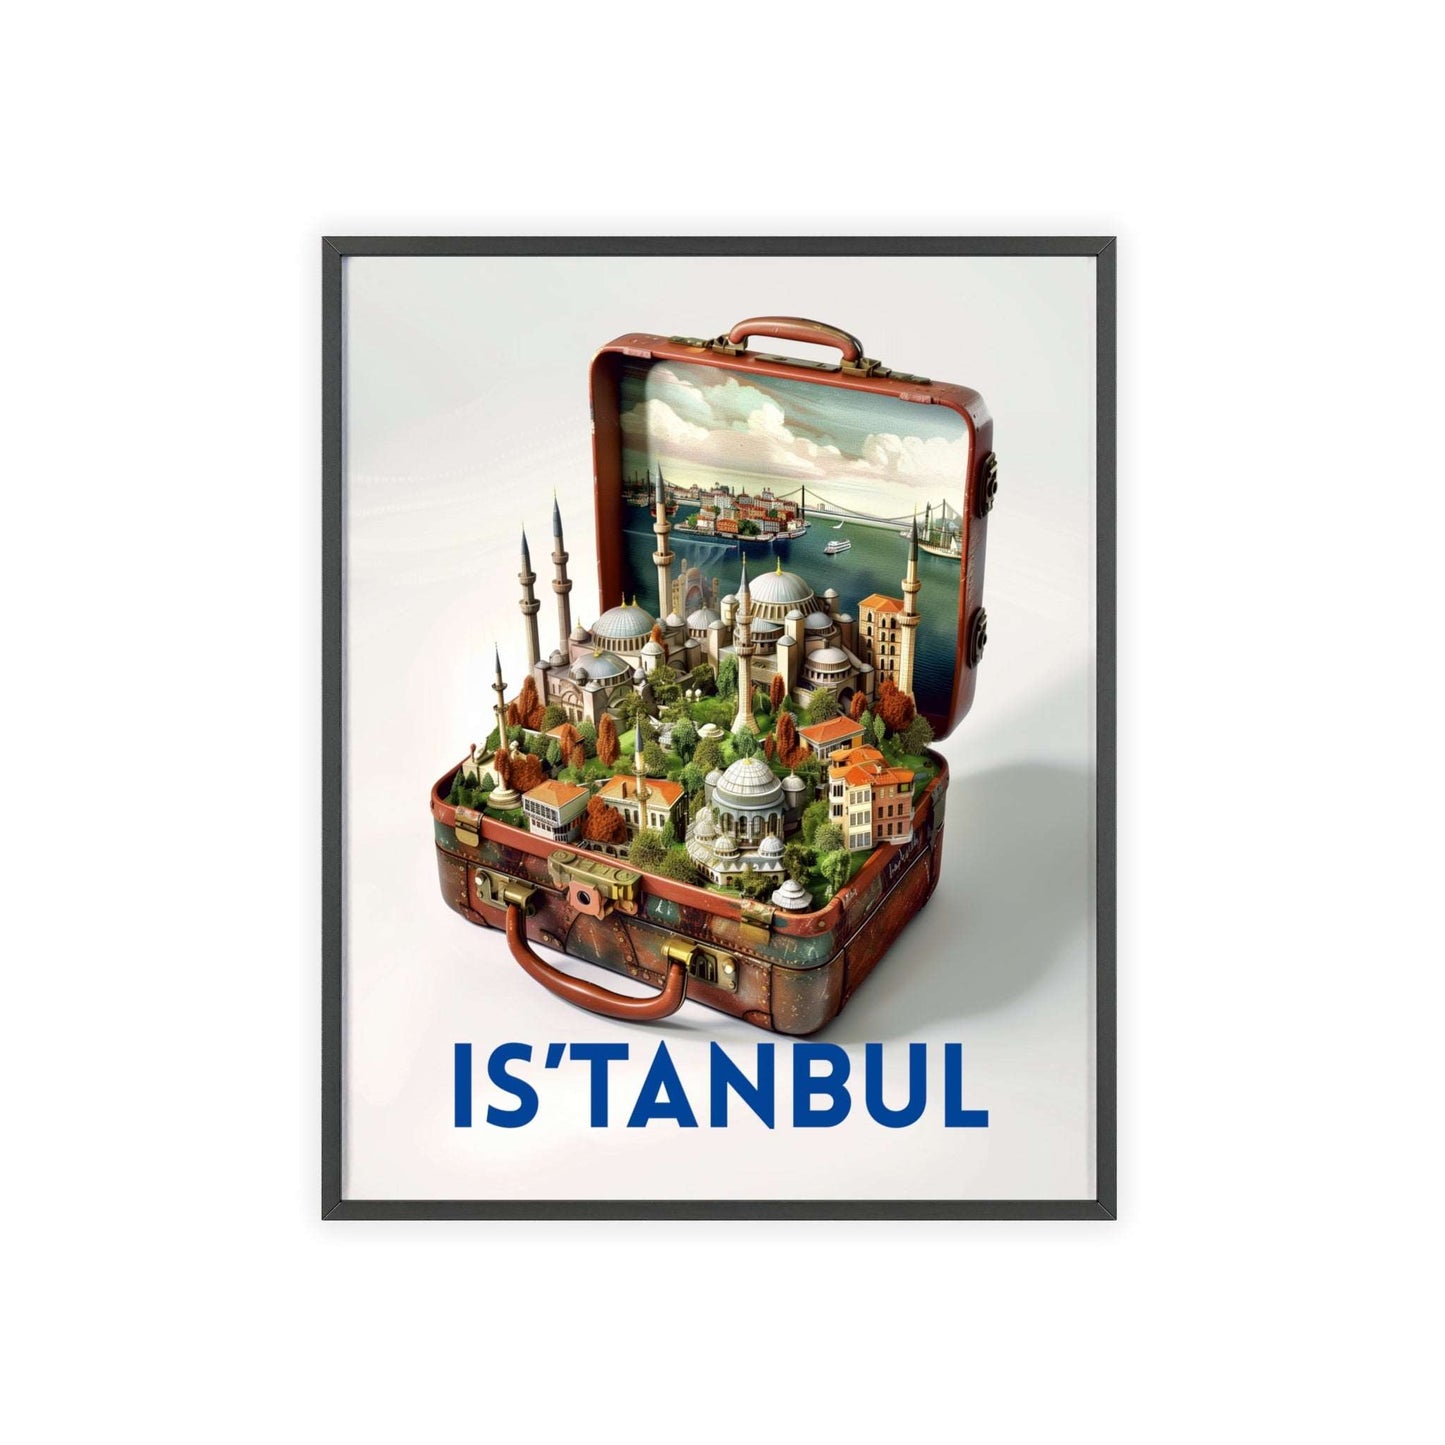 Elegant Istanbul in a Suitcase travel poster featuring iconic landmarks, inspiring wanderlust and a love for timeless travel